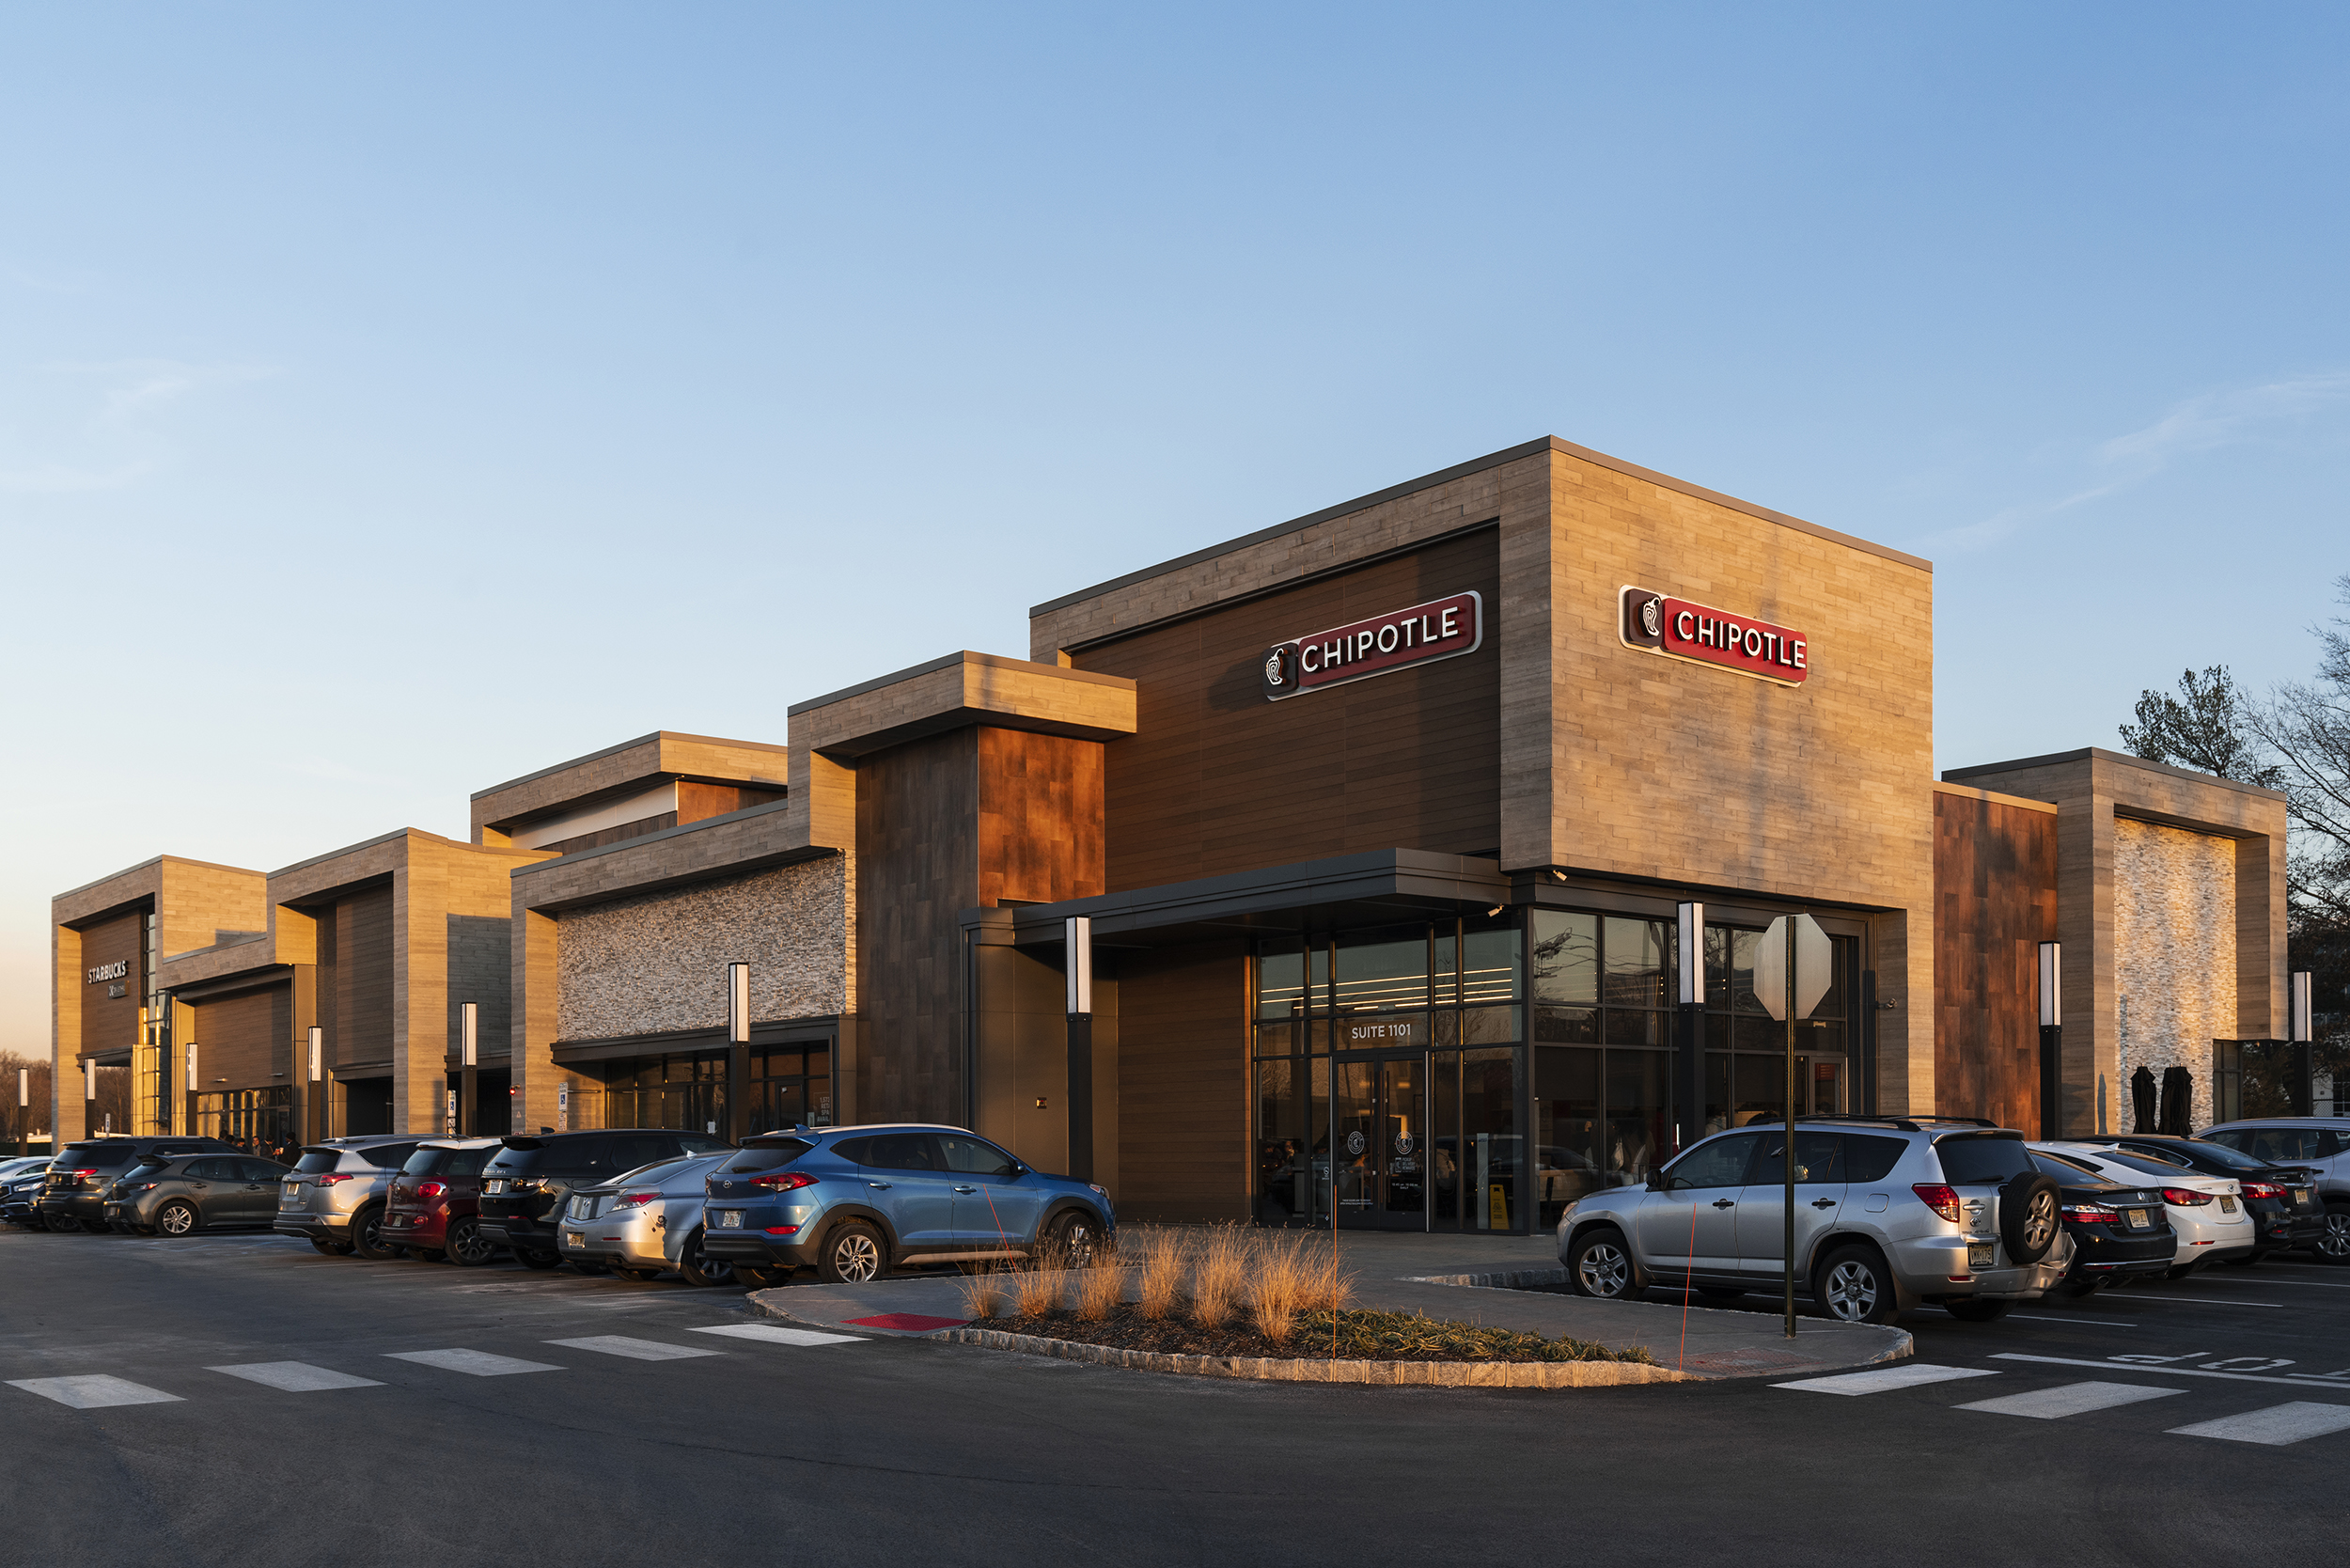 Chipotle Commercial Property